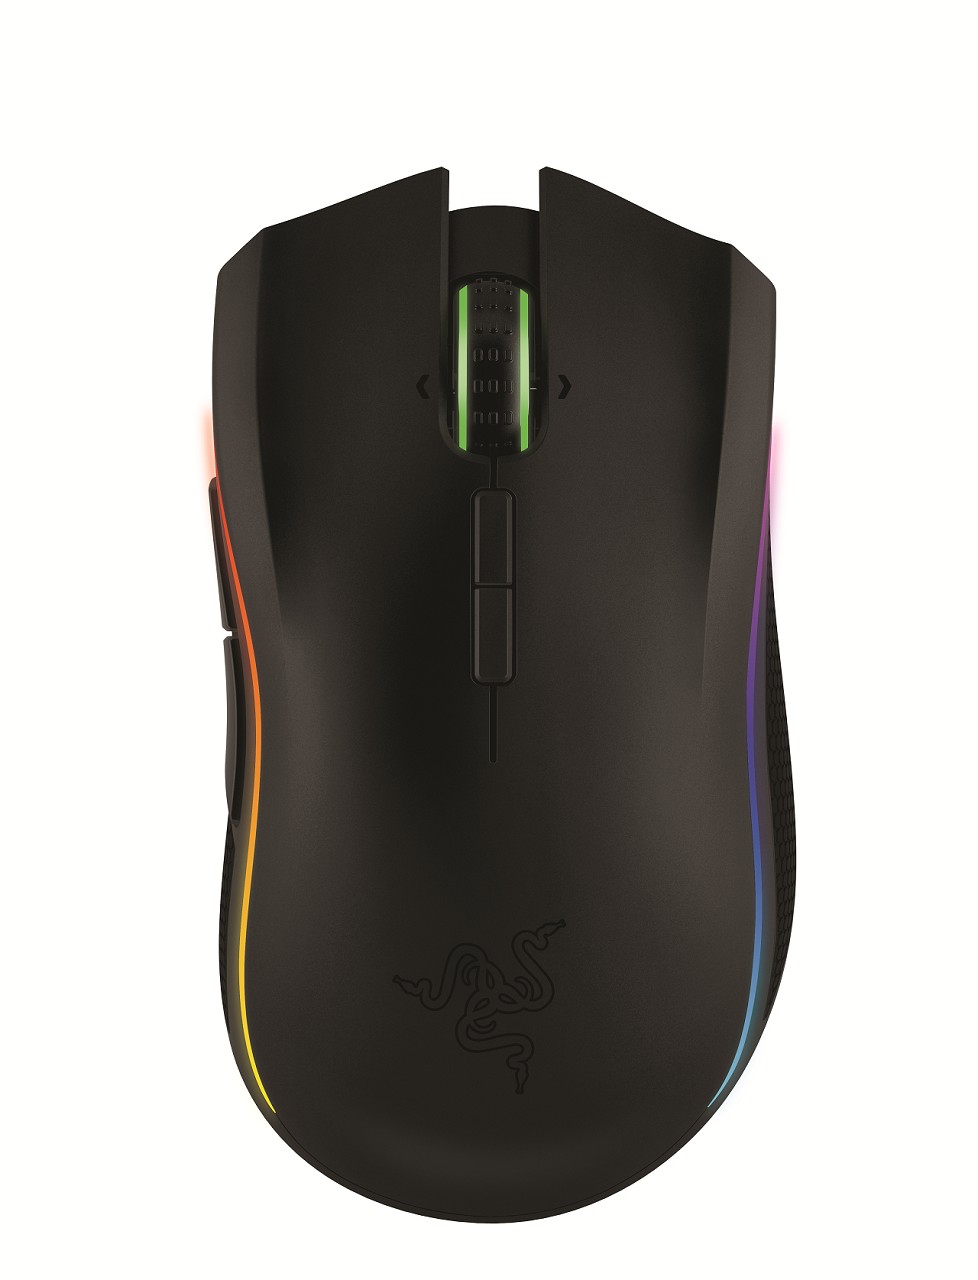 Razer Mamba, Wired & Wireless (Chroma) Mouse Review - 2 of 5 - Bjorn3D.com